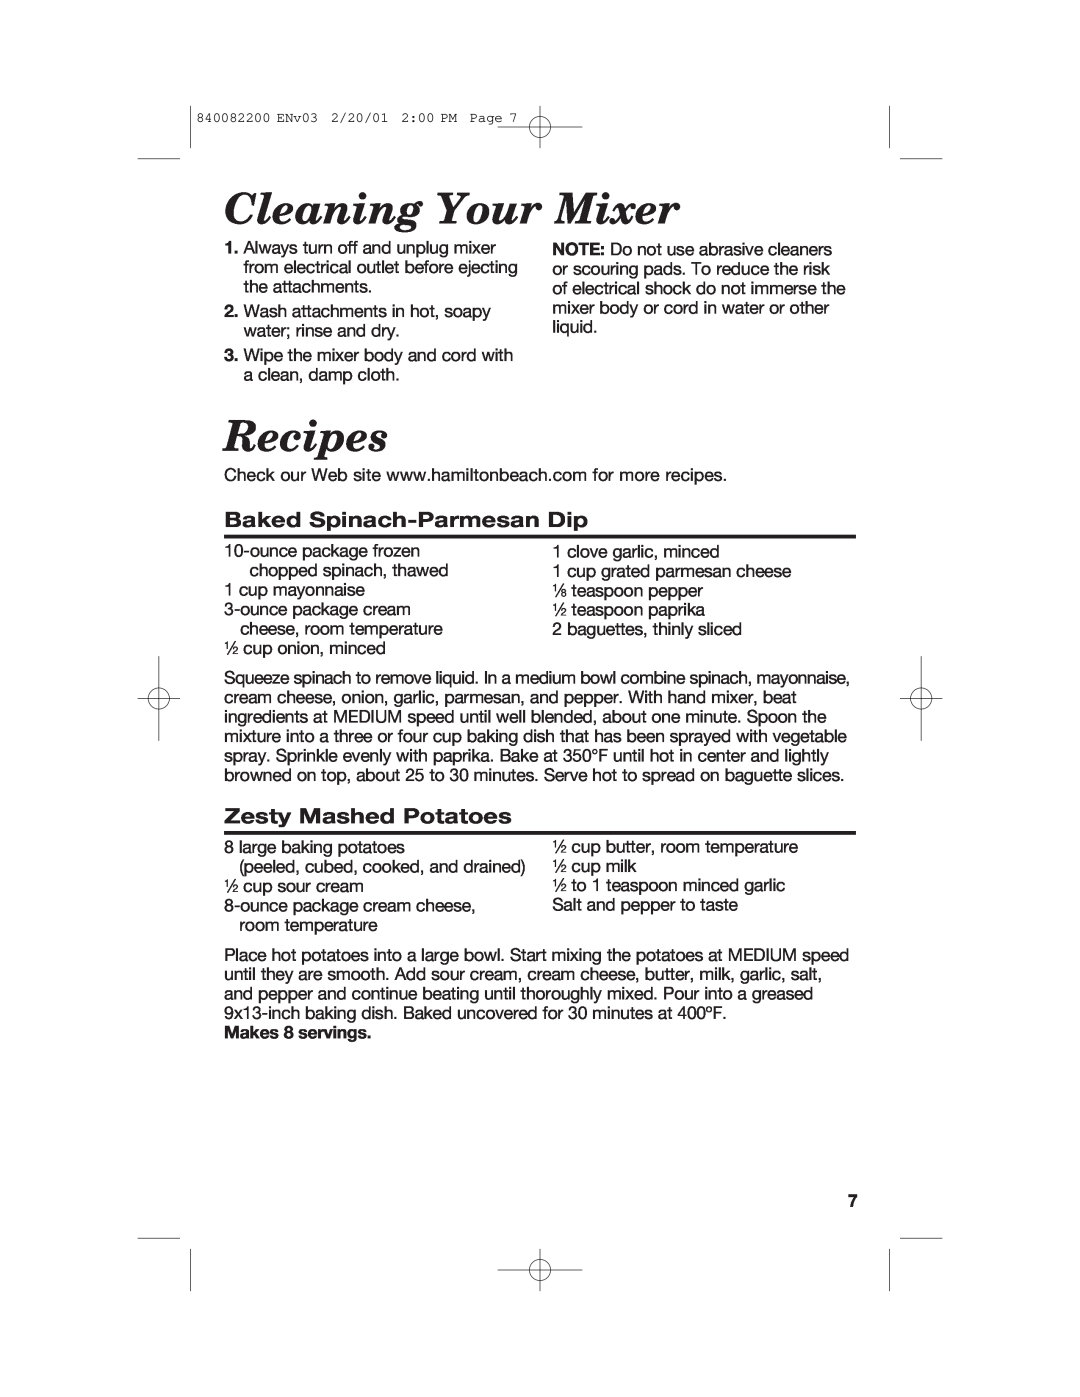 Hamilton Beach 62695RC Cleaning Your Mixer, Recipes, Baked Spinach-Parmesan Dip, Zesty Mashed Potatoes, Makes 8 servings 